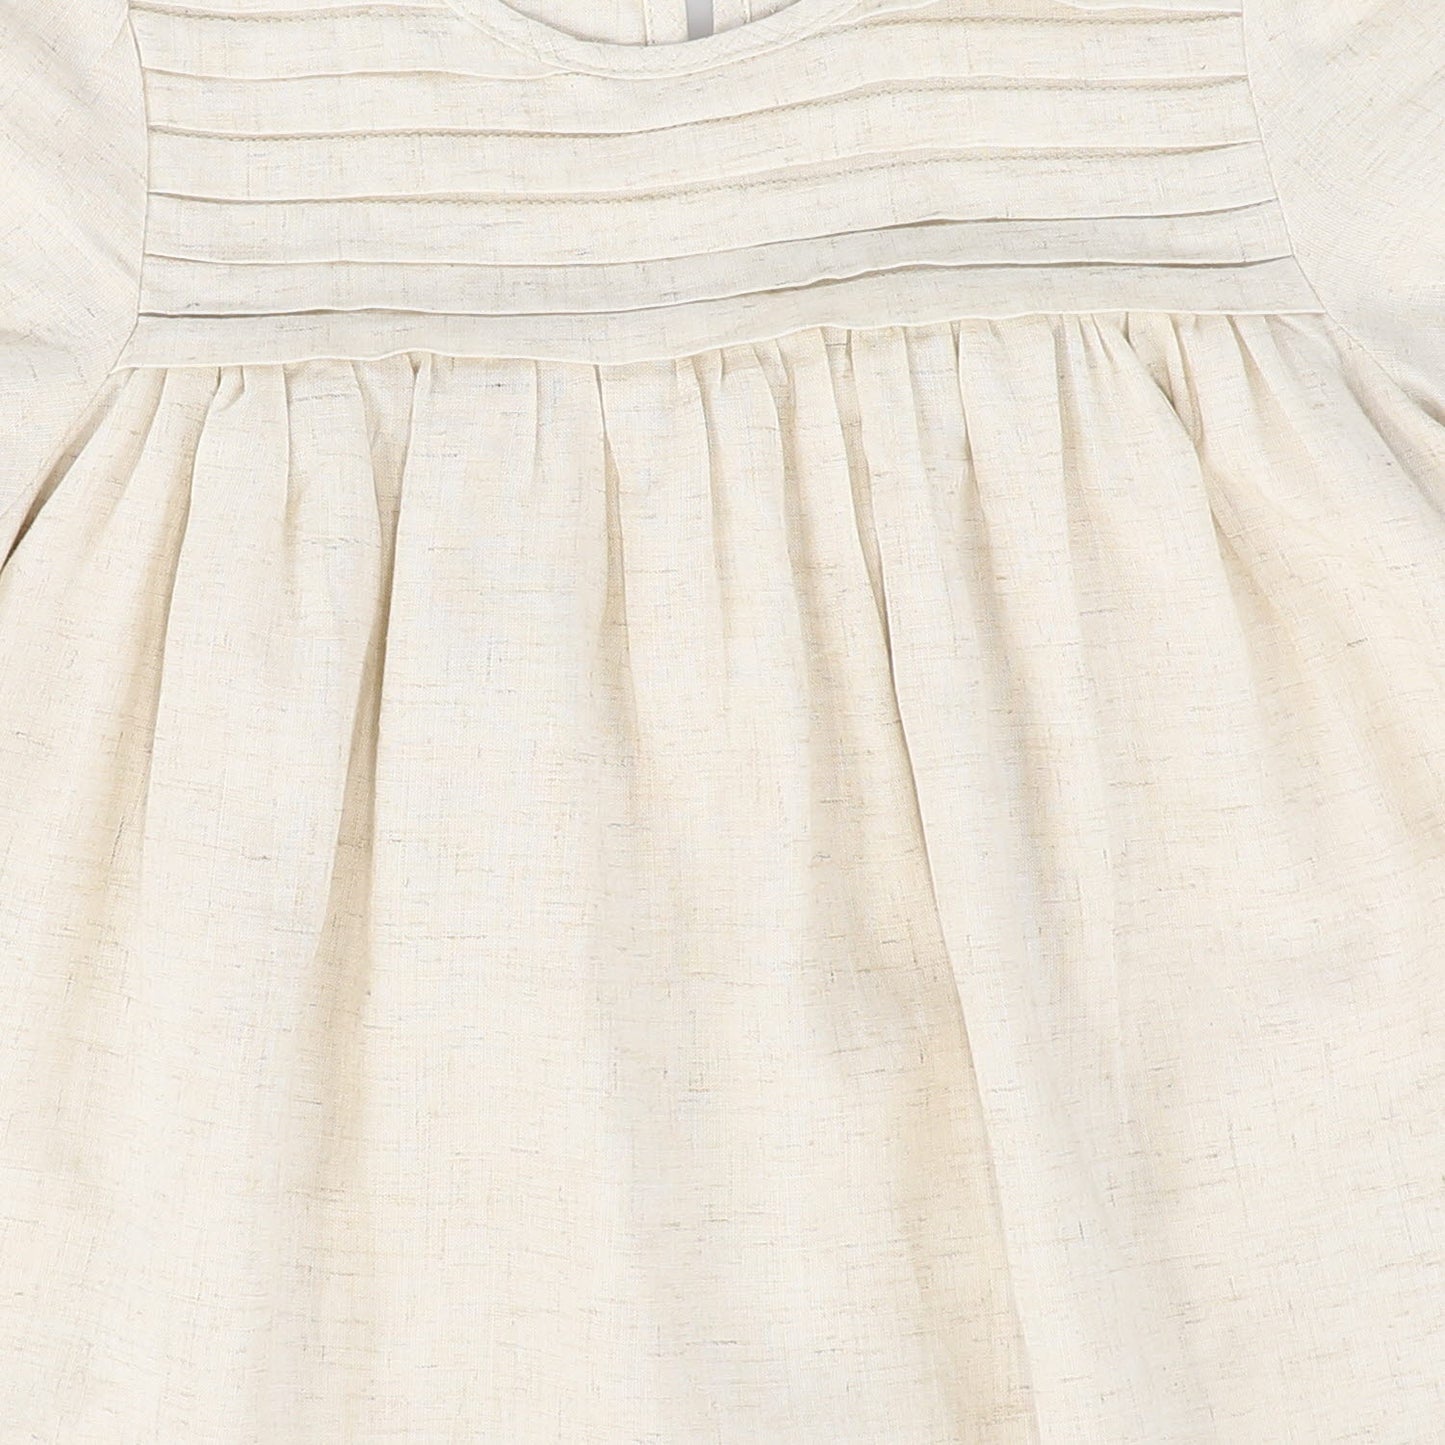 BACE COLLECTION OATMEAL PLEATED DETAIL BUBBLE SS DRESS [FINAL SALE]